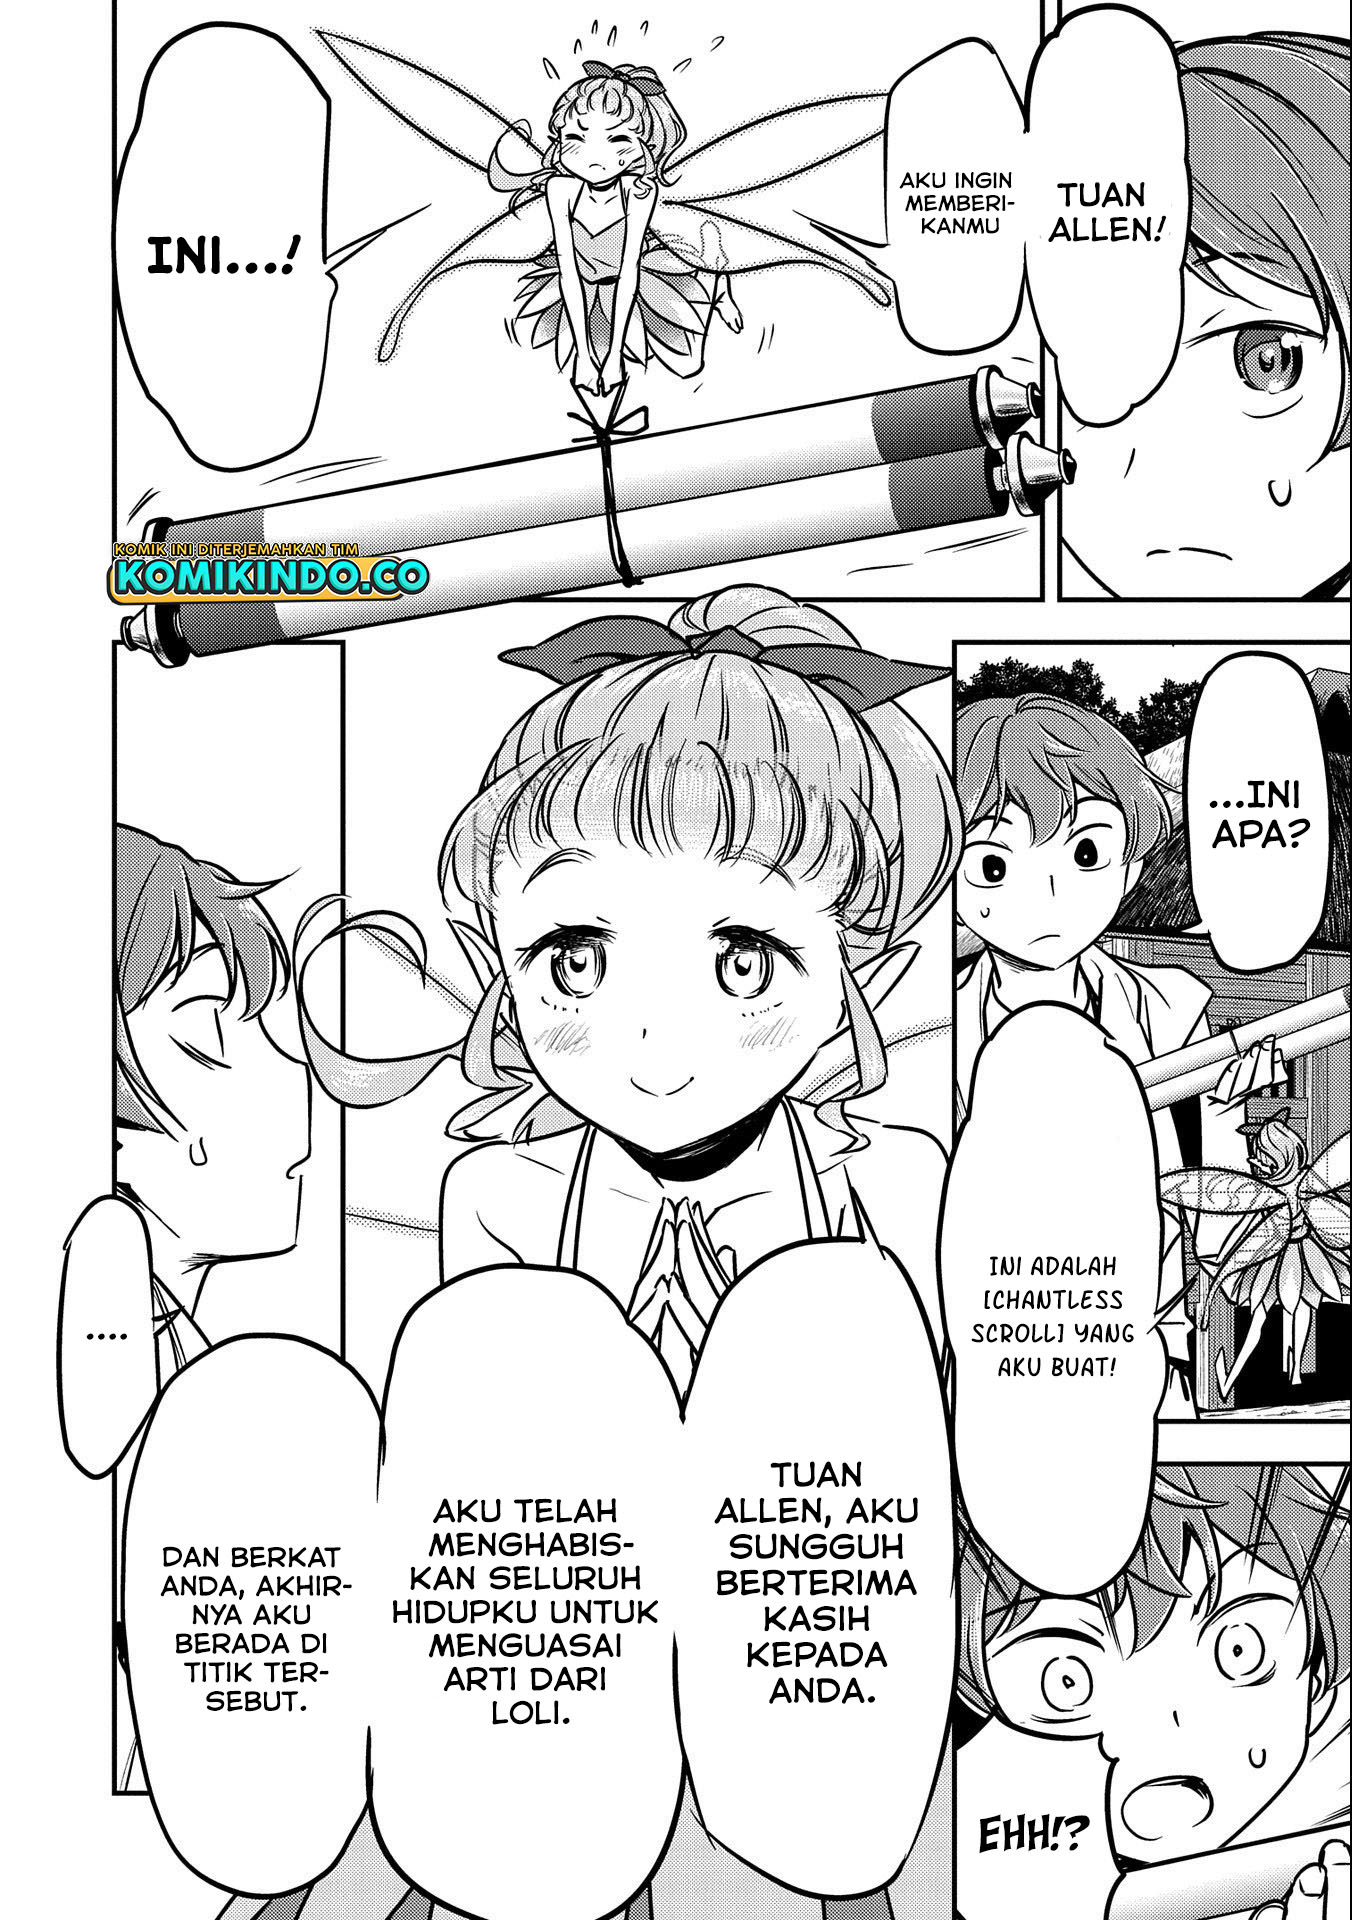 Villager A Wants to Save the Villainess no Matter What! Chapter 09